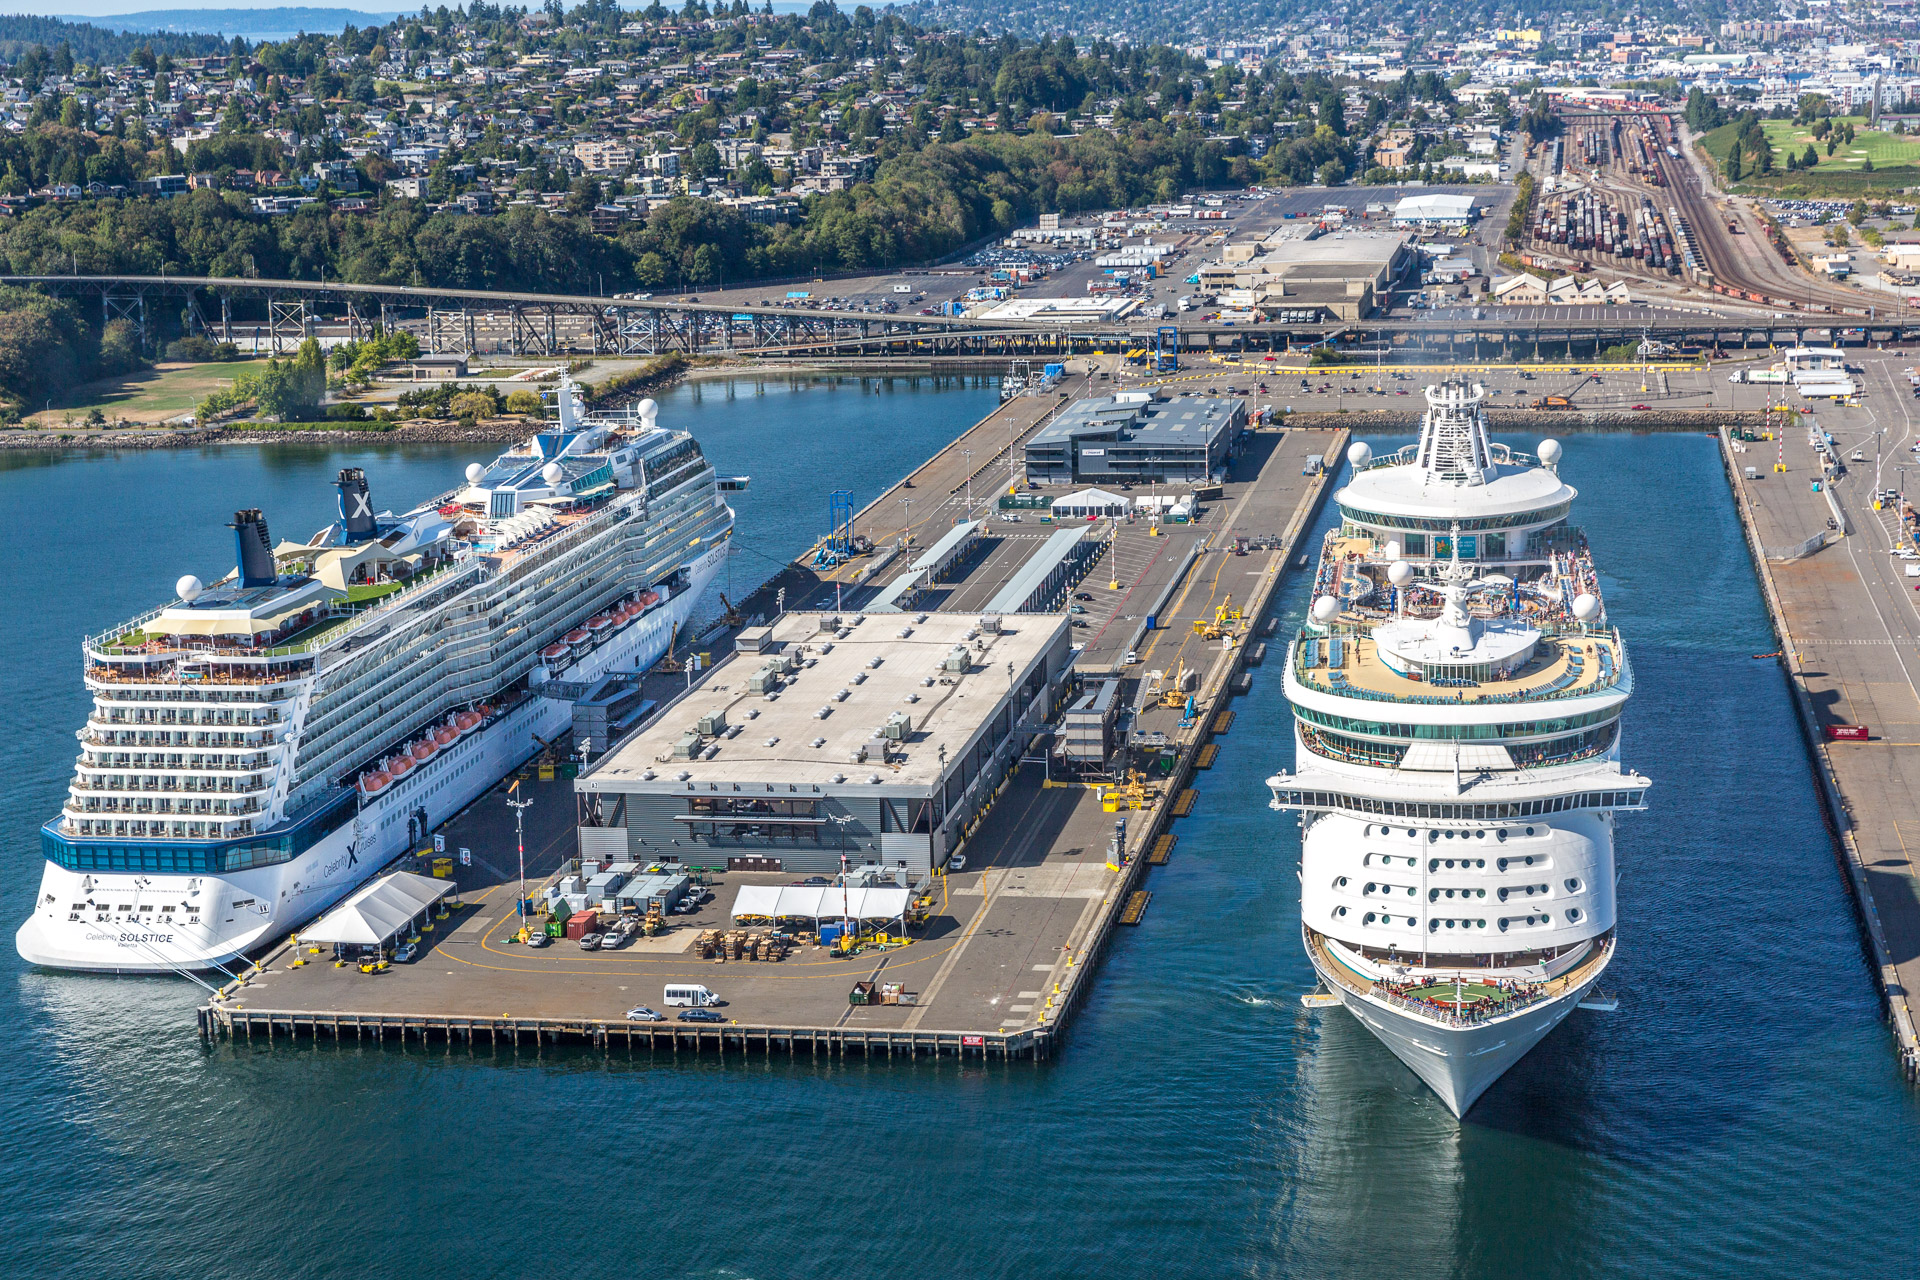 Smith Cove Cruise Terminal at Pier 91 Port of Seattle